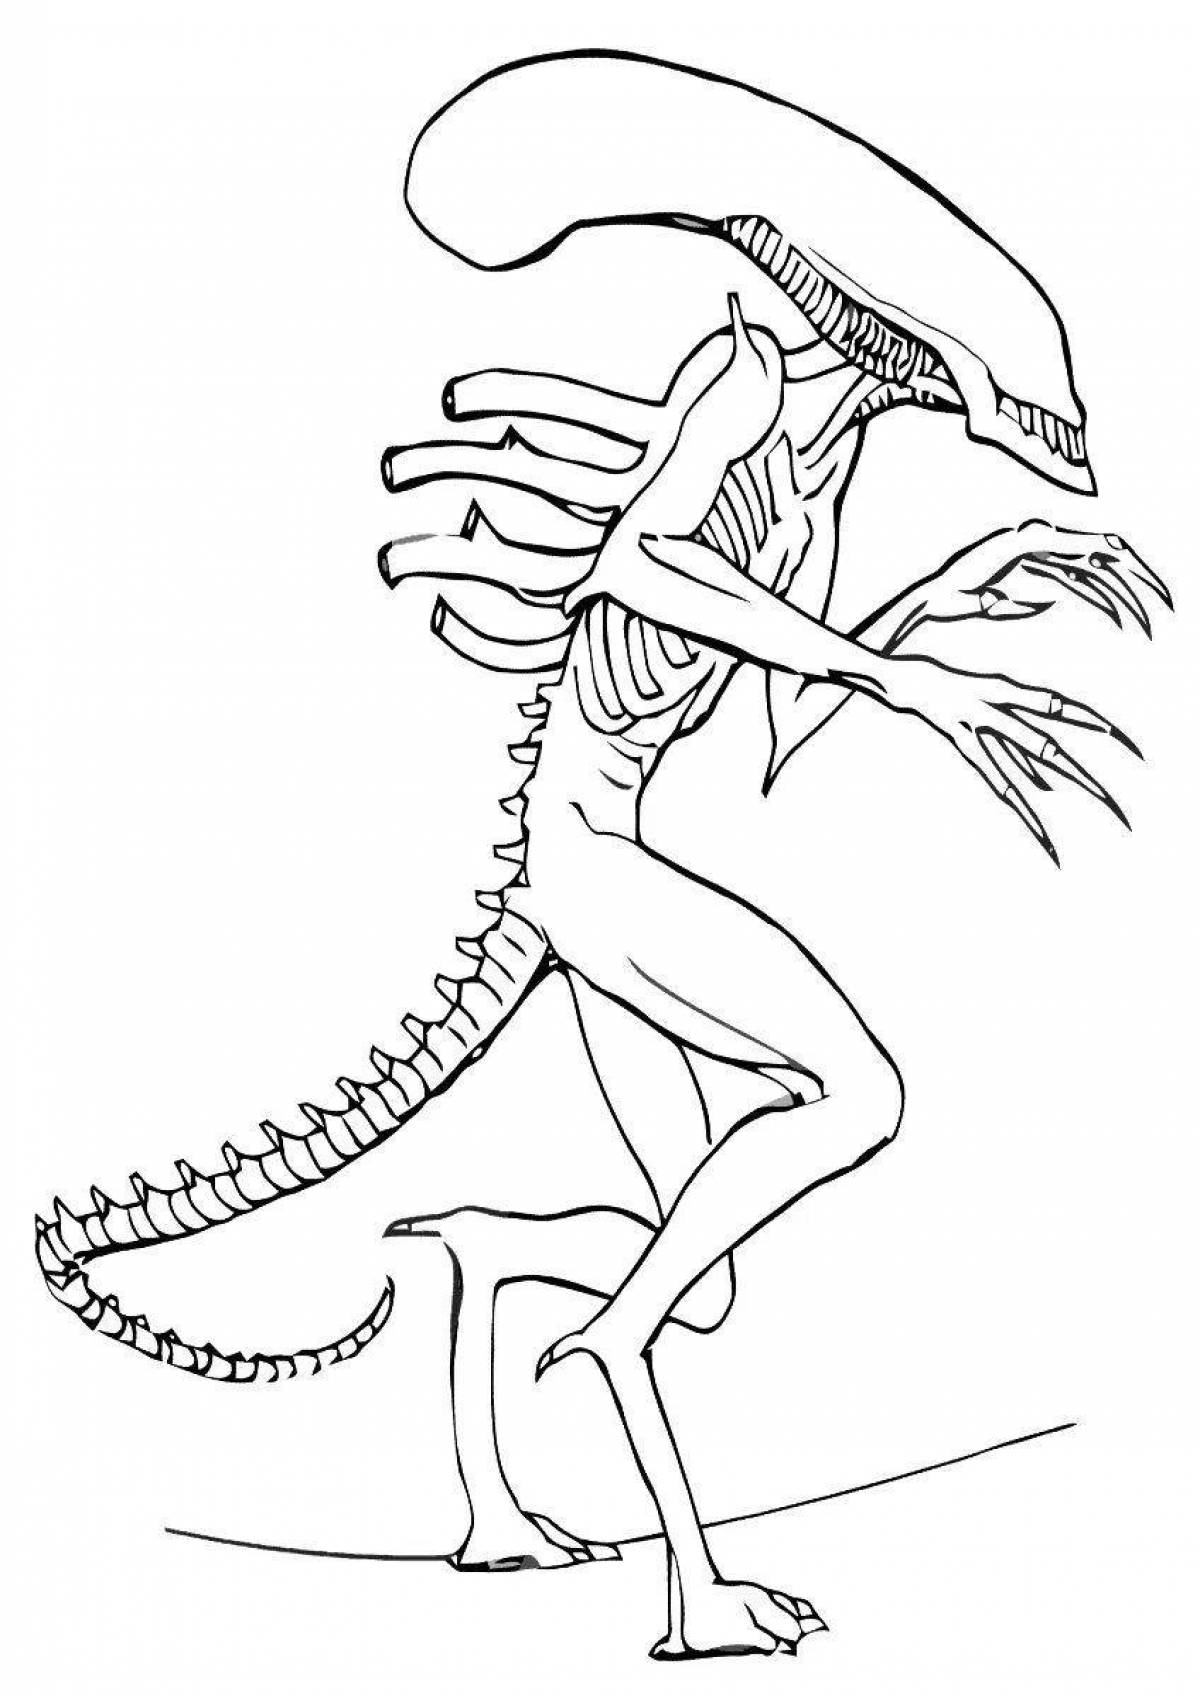 Coloring page dazzling sirenhead